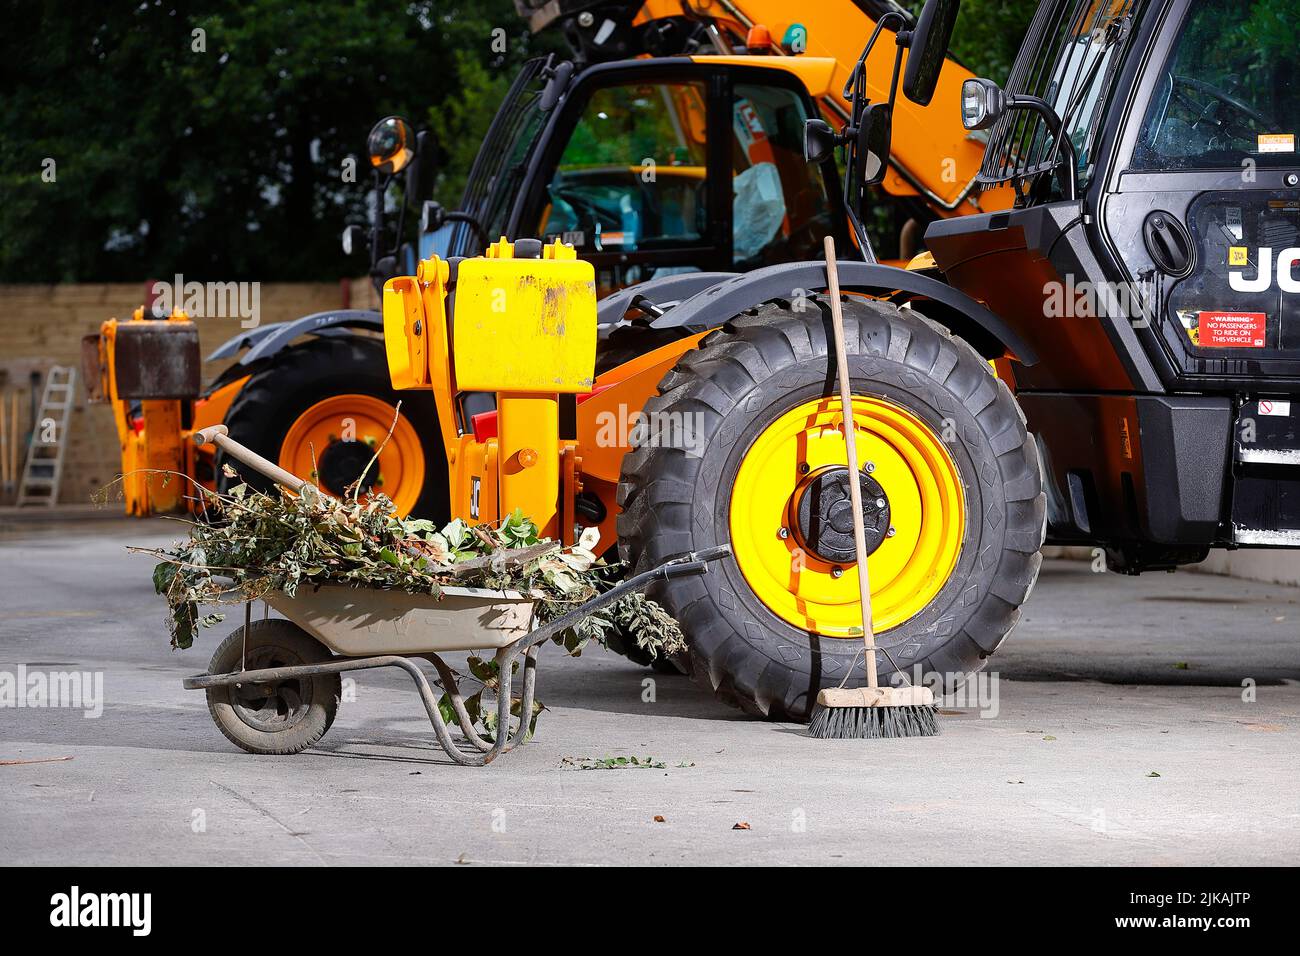 A wheelbarrow and brush pictured with JCB Telehandlers at a plant hire yard Stock Photo